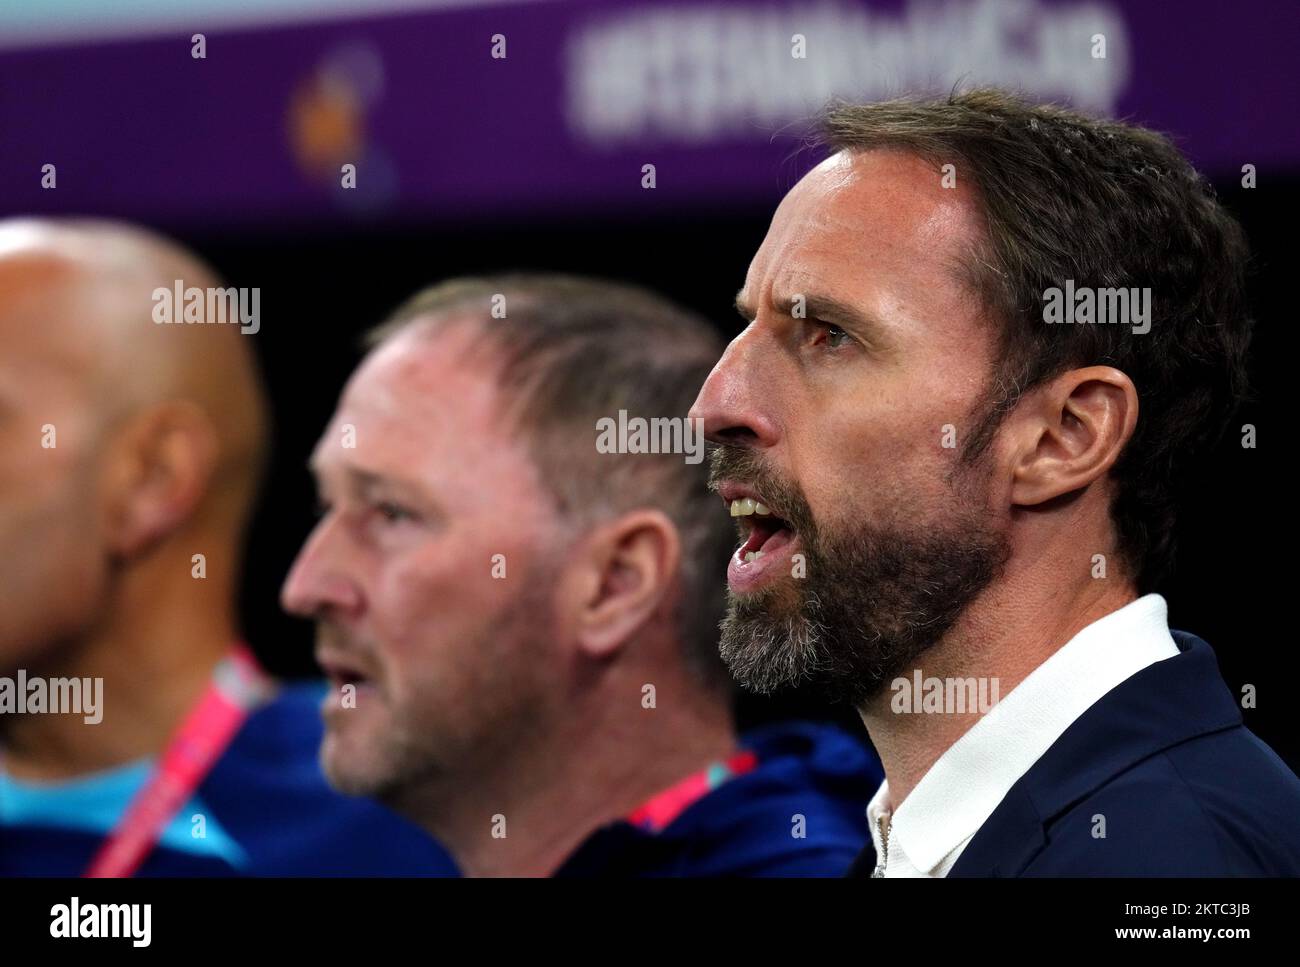 England manager Gareth Southgate during the FIFA World Cup Group B match at the Ahmad Bin Ali Stadium, Al Rayyan, Qatar. Picture date: Tuesday November 29, 2022. Stock Photo